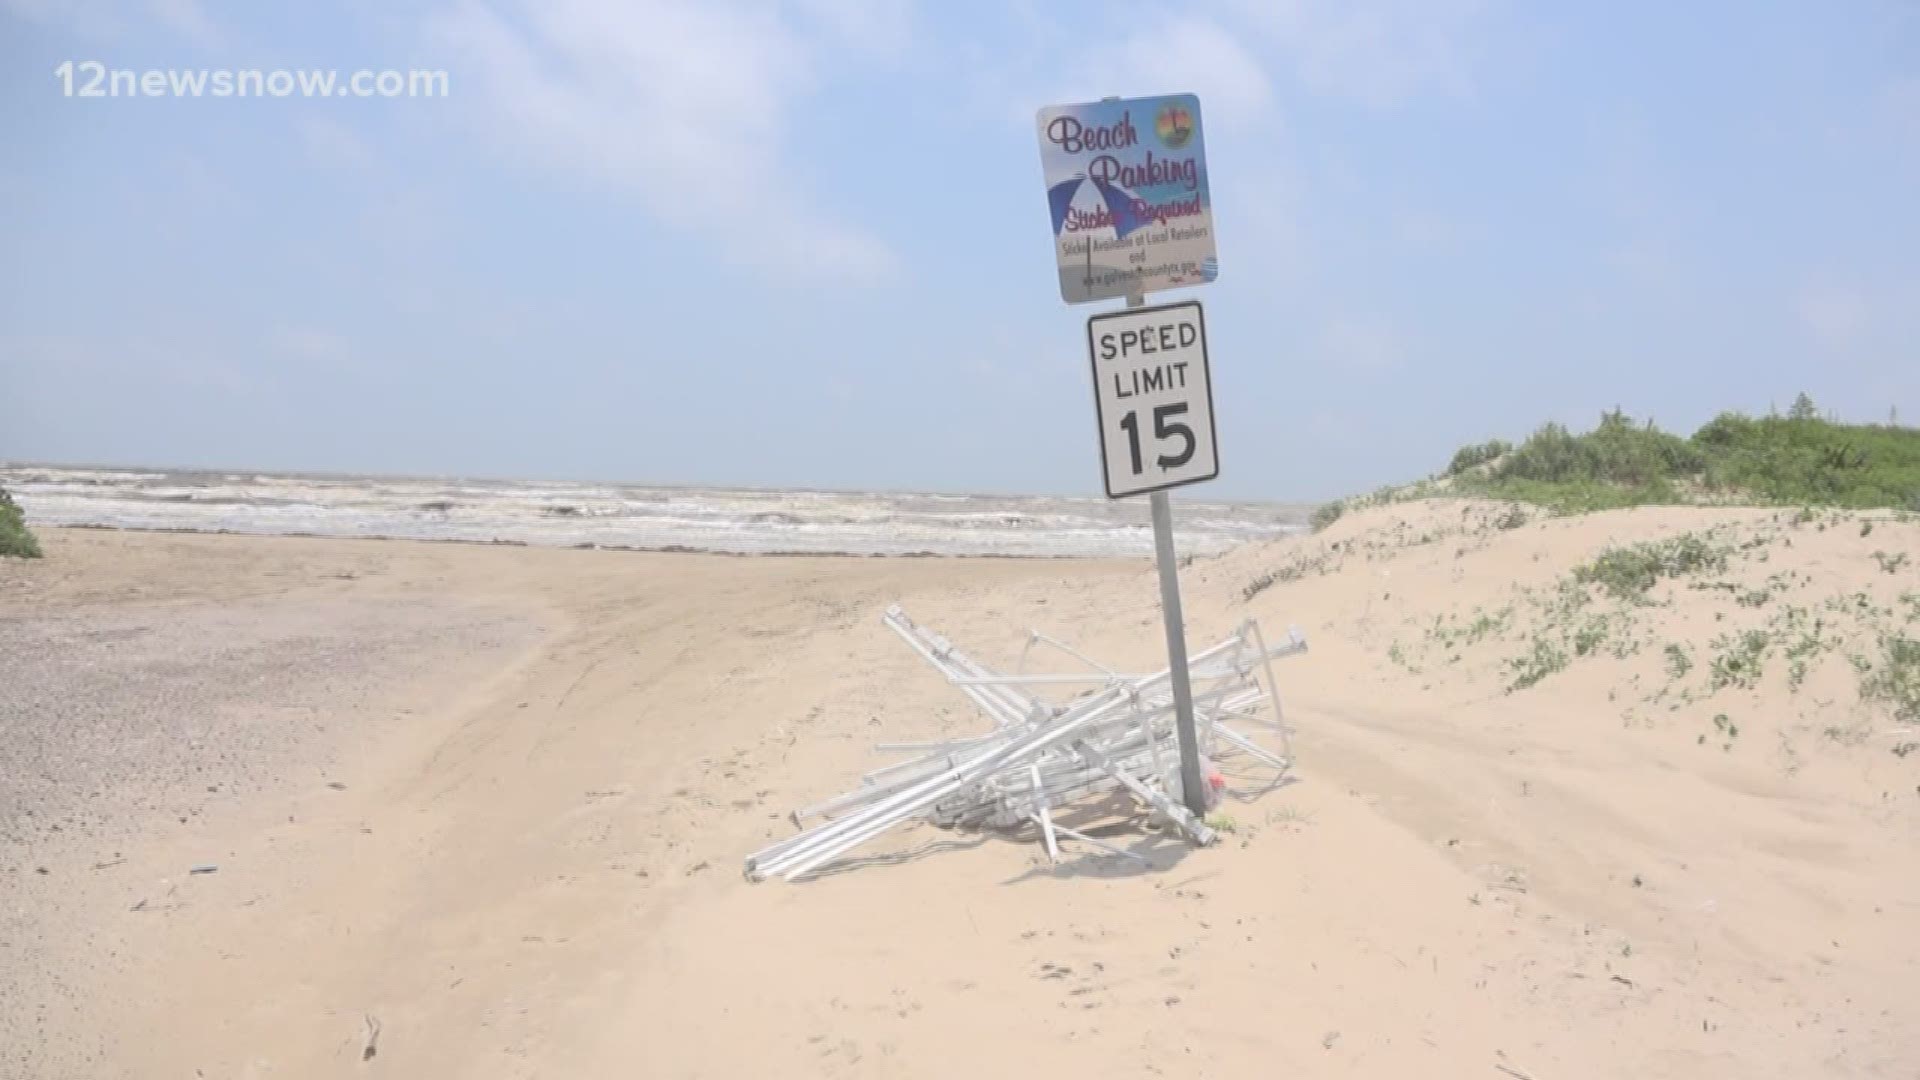 With coronavirus cases spiking across Texas, officials decided to close beach access for the weekend